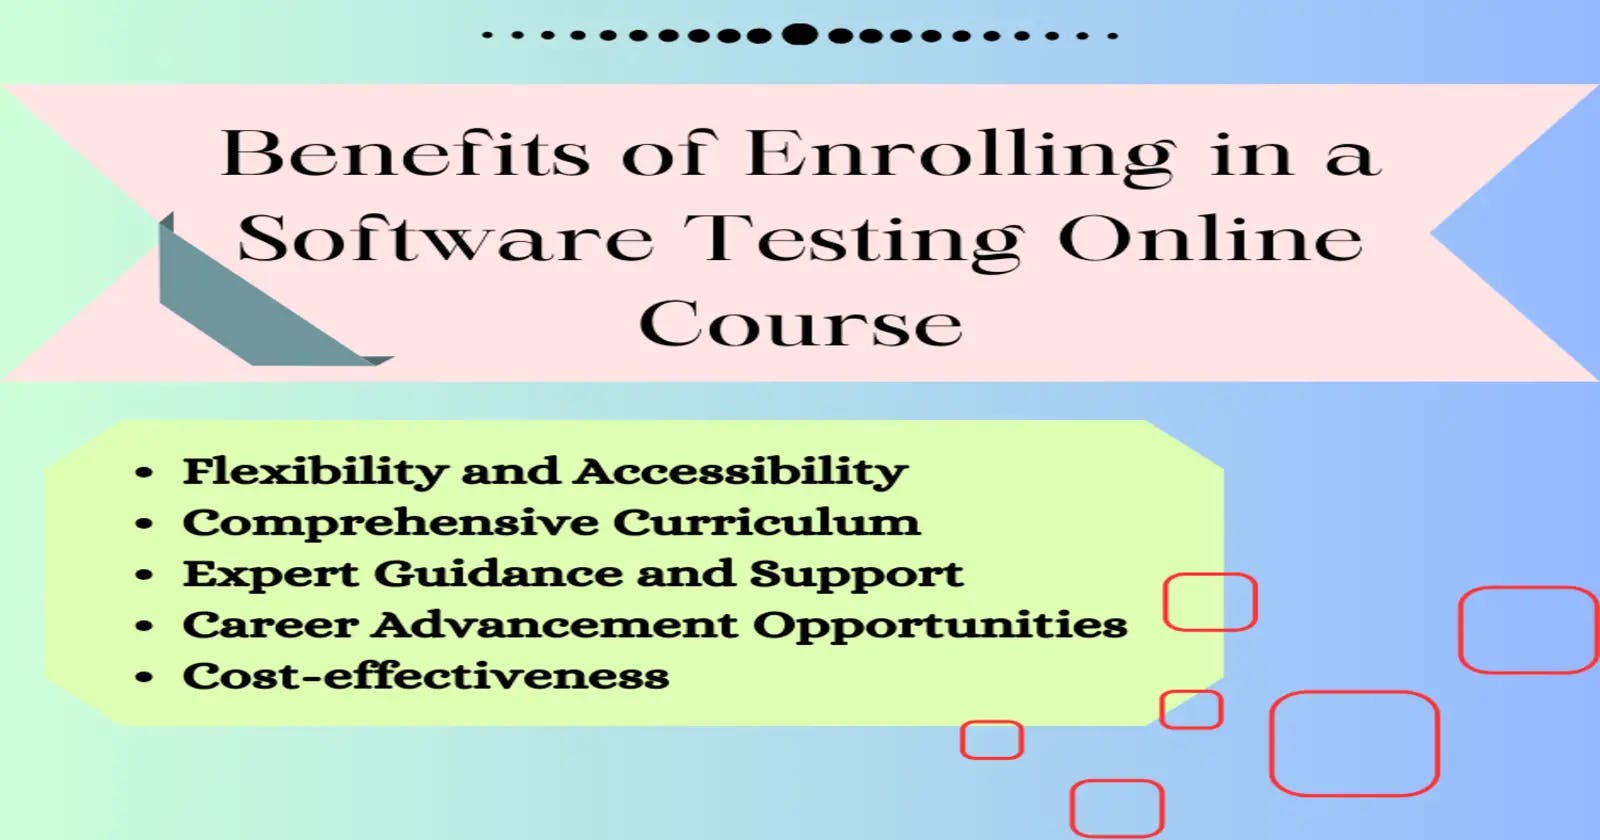 Benefits of Enrolling in a Software Testing Online Course